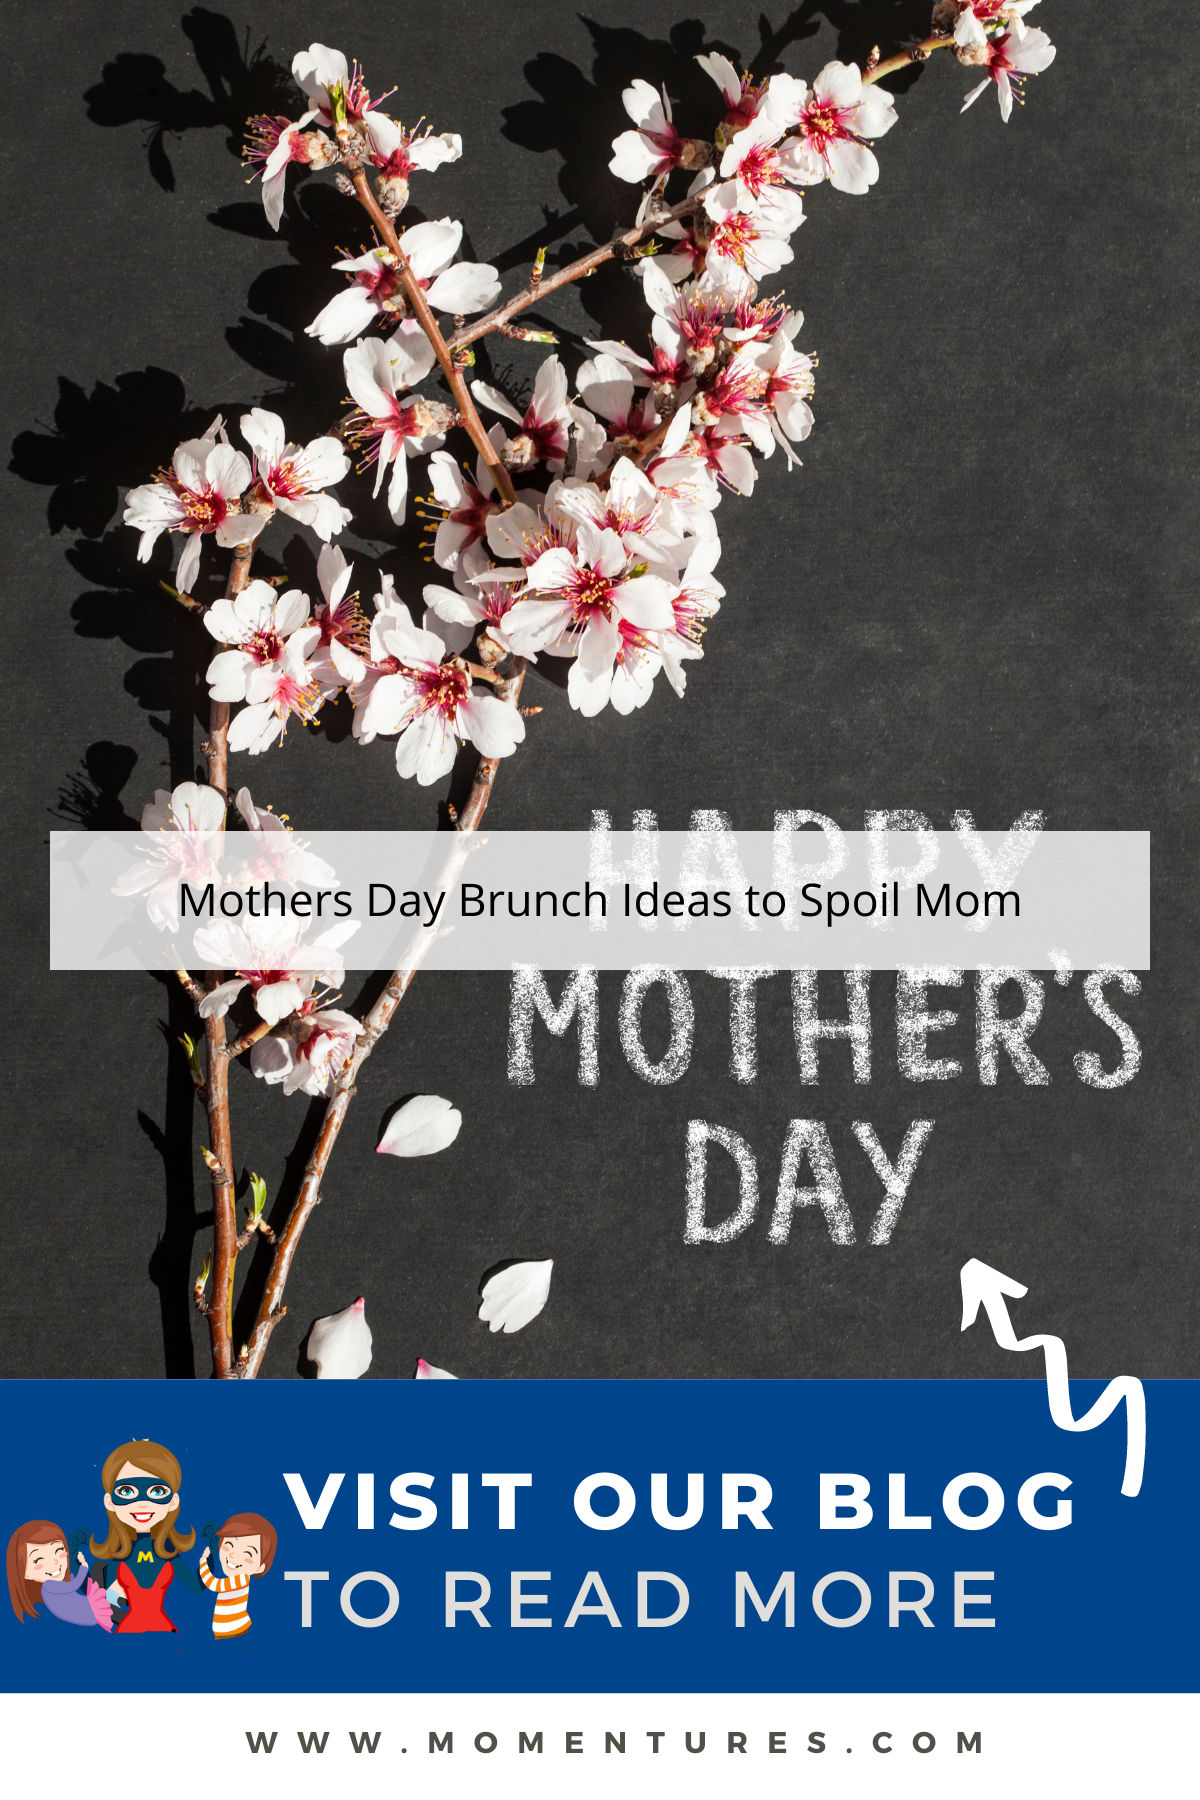 Mothers Day Brunch Ideas to Spoil Mom